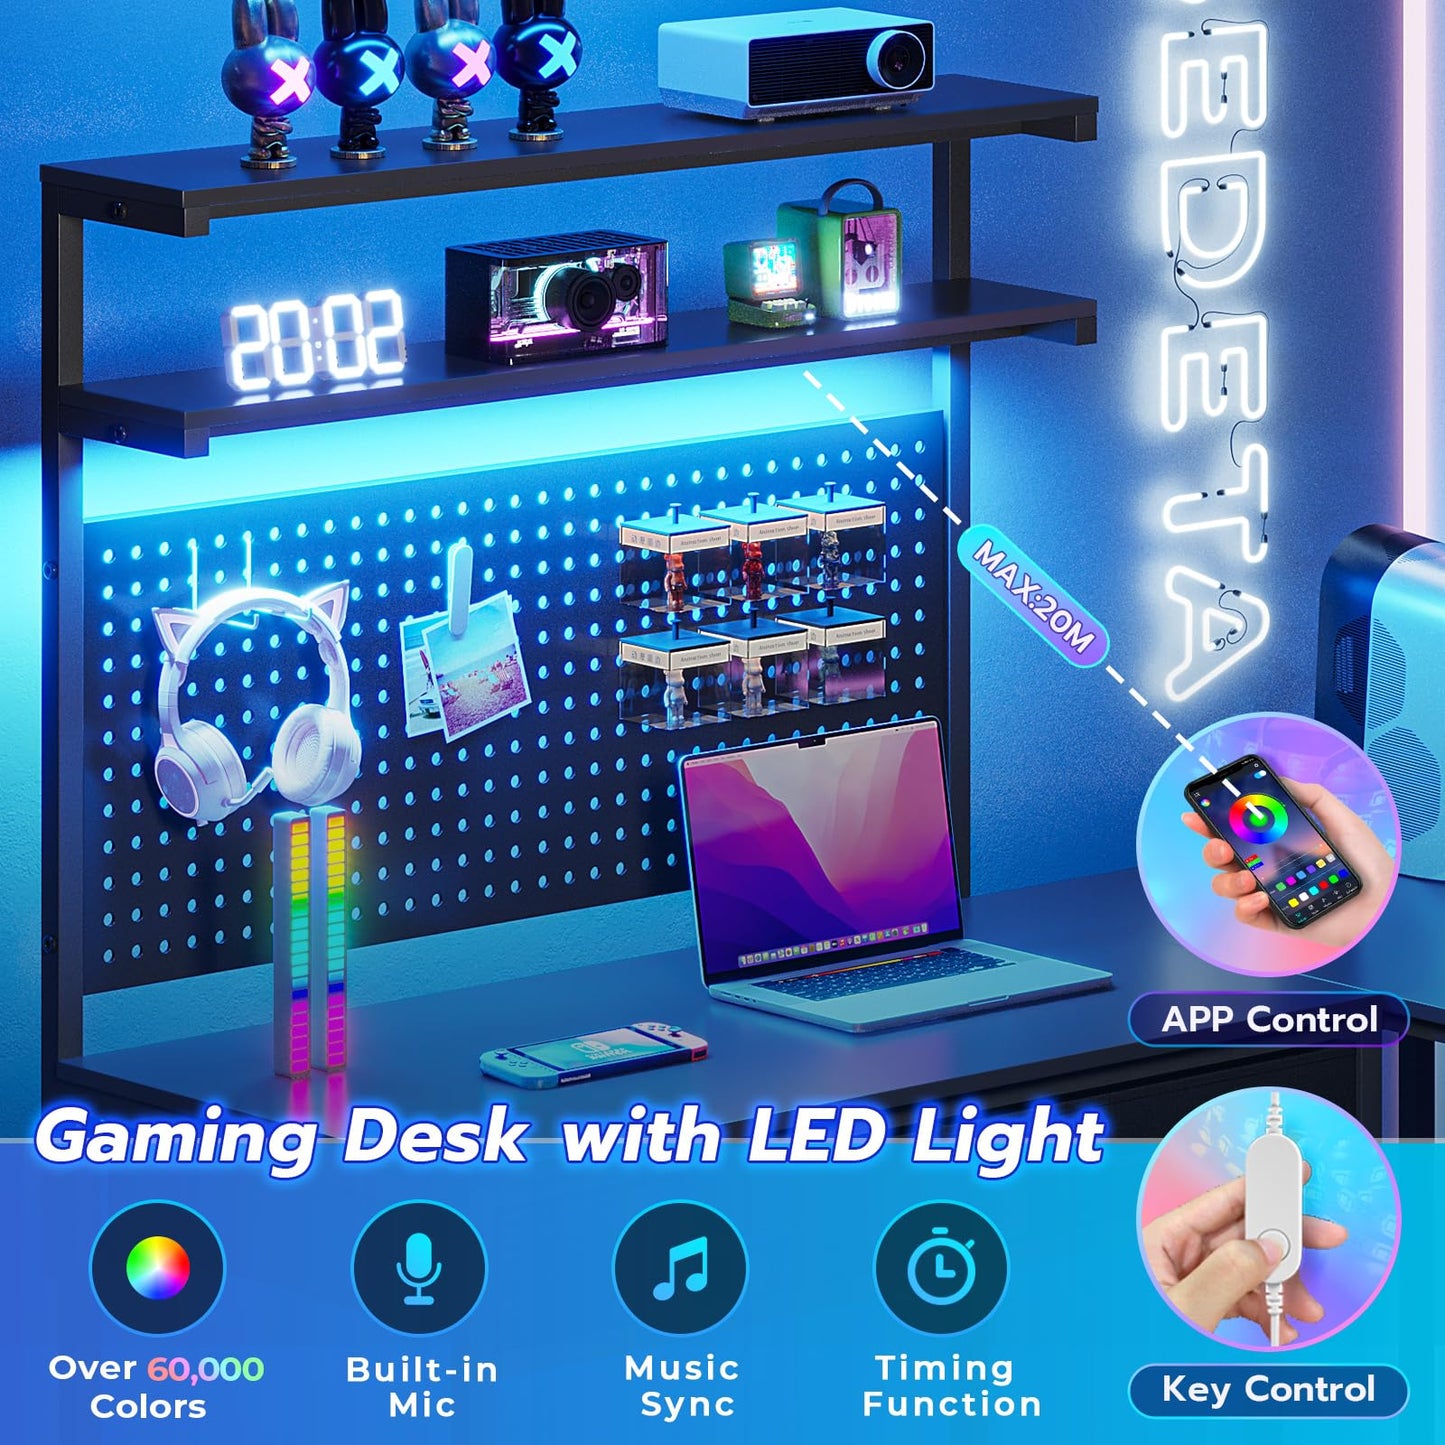 SEDETA L Shaped Gaming Desk with LED Lights, Pegboard and Drawers, Gaming Desk with Hutch, Computer Desk with Monitor Stand, Storage Shelves, Home Office Desk Corner Desk, Gaming Table, Black